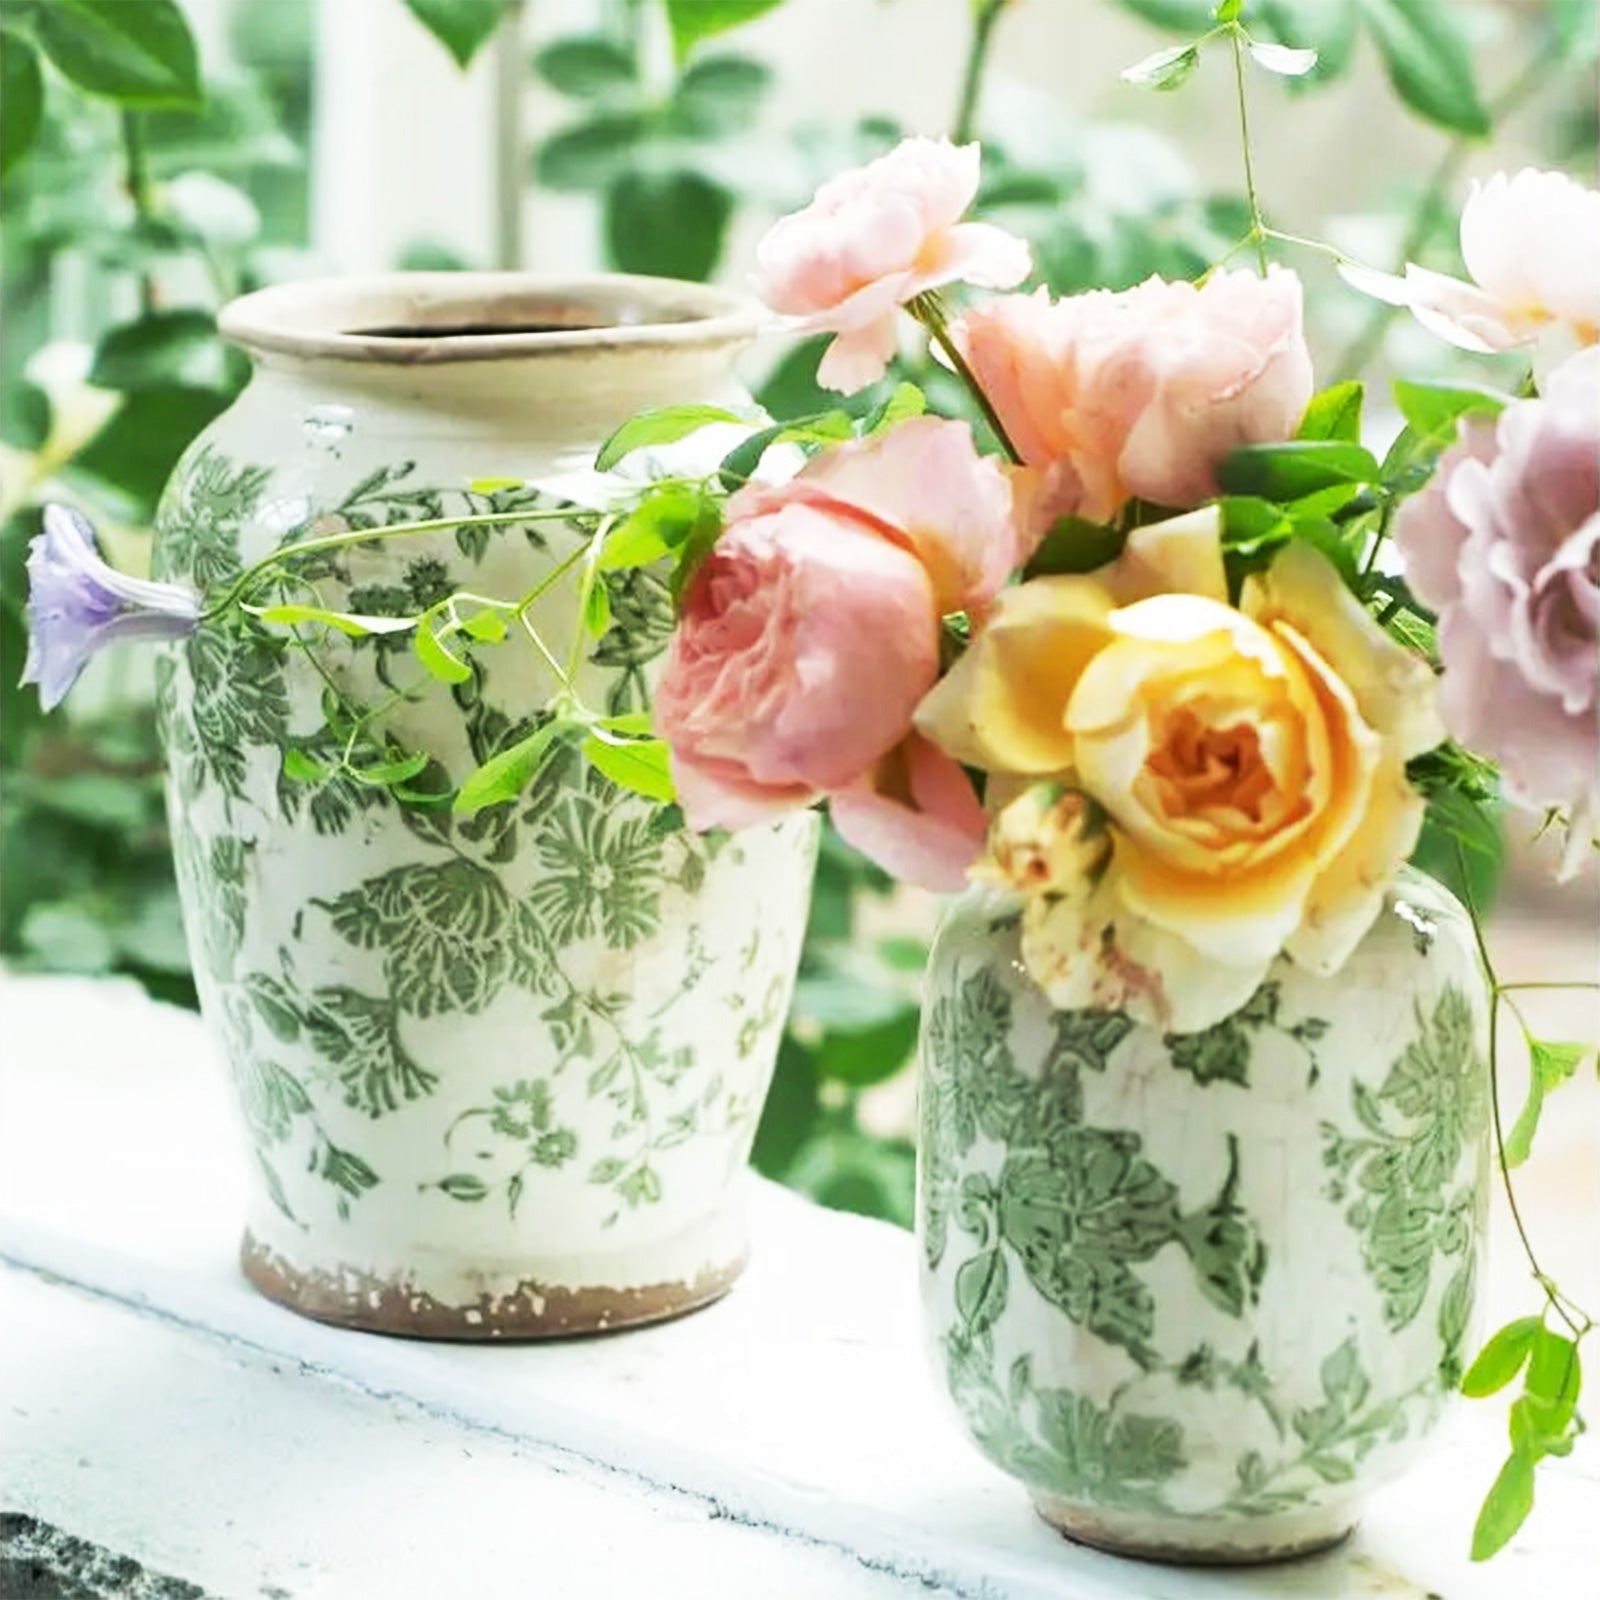 Vintage-inspired Craquelure Vase with Greenery on Off-White Ceramic